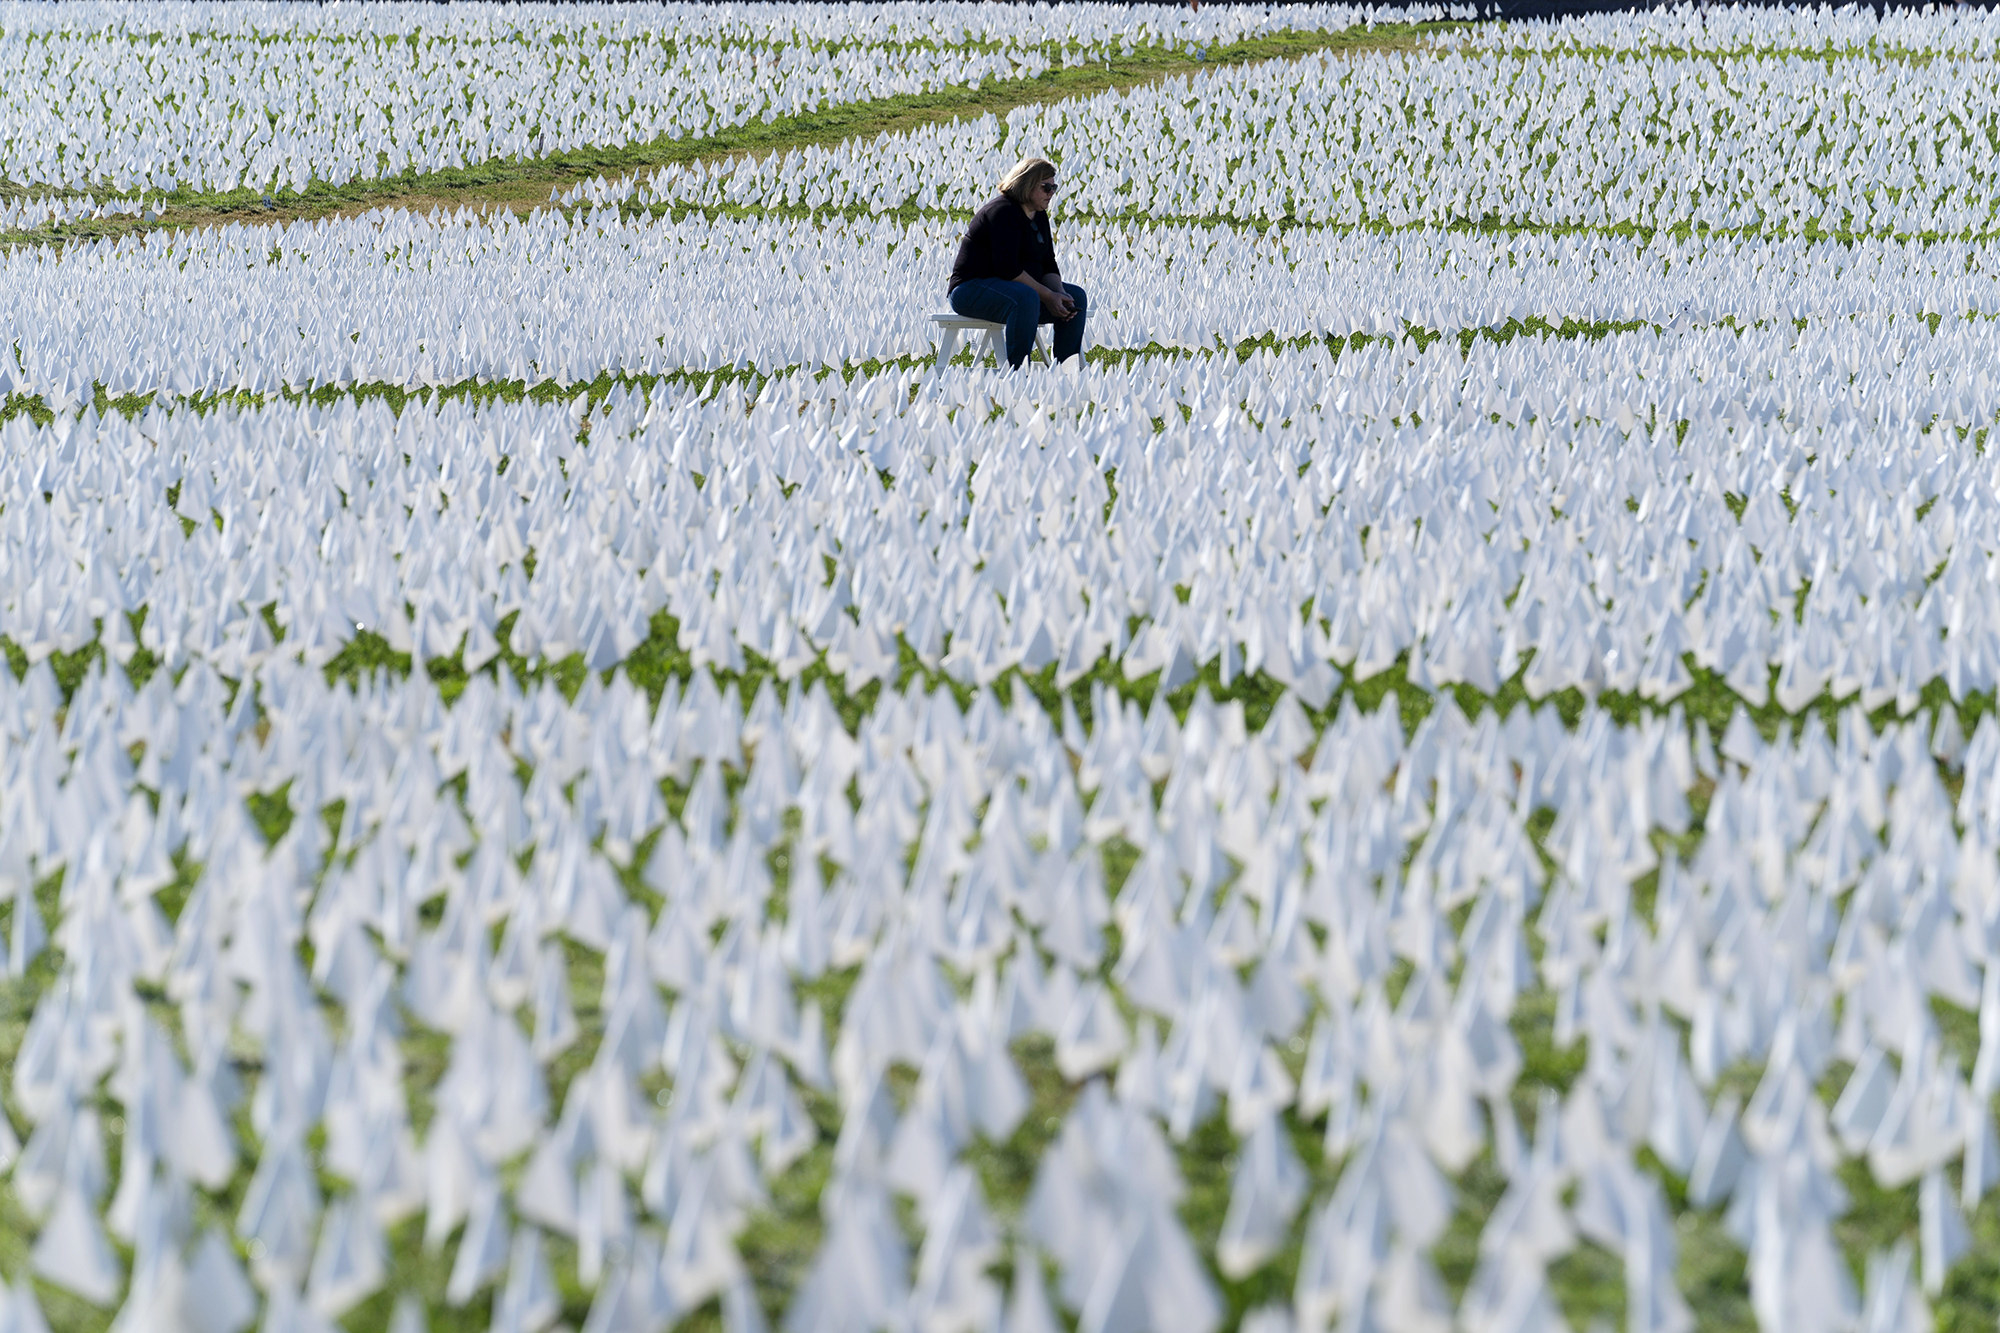 Thousands of flags form a field of white with a person sitting in the middle